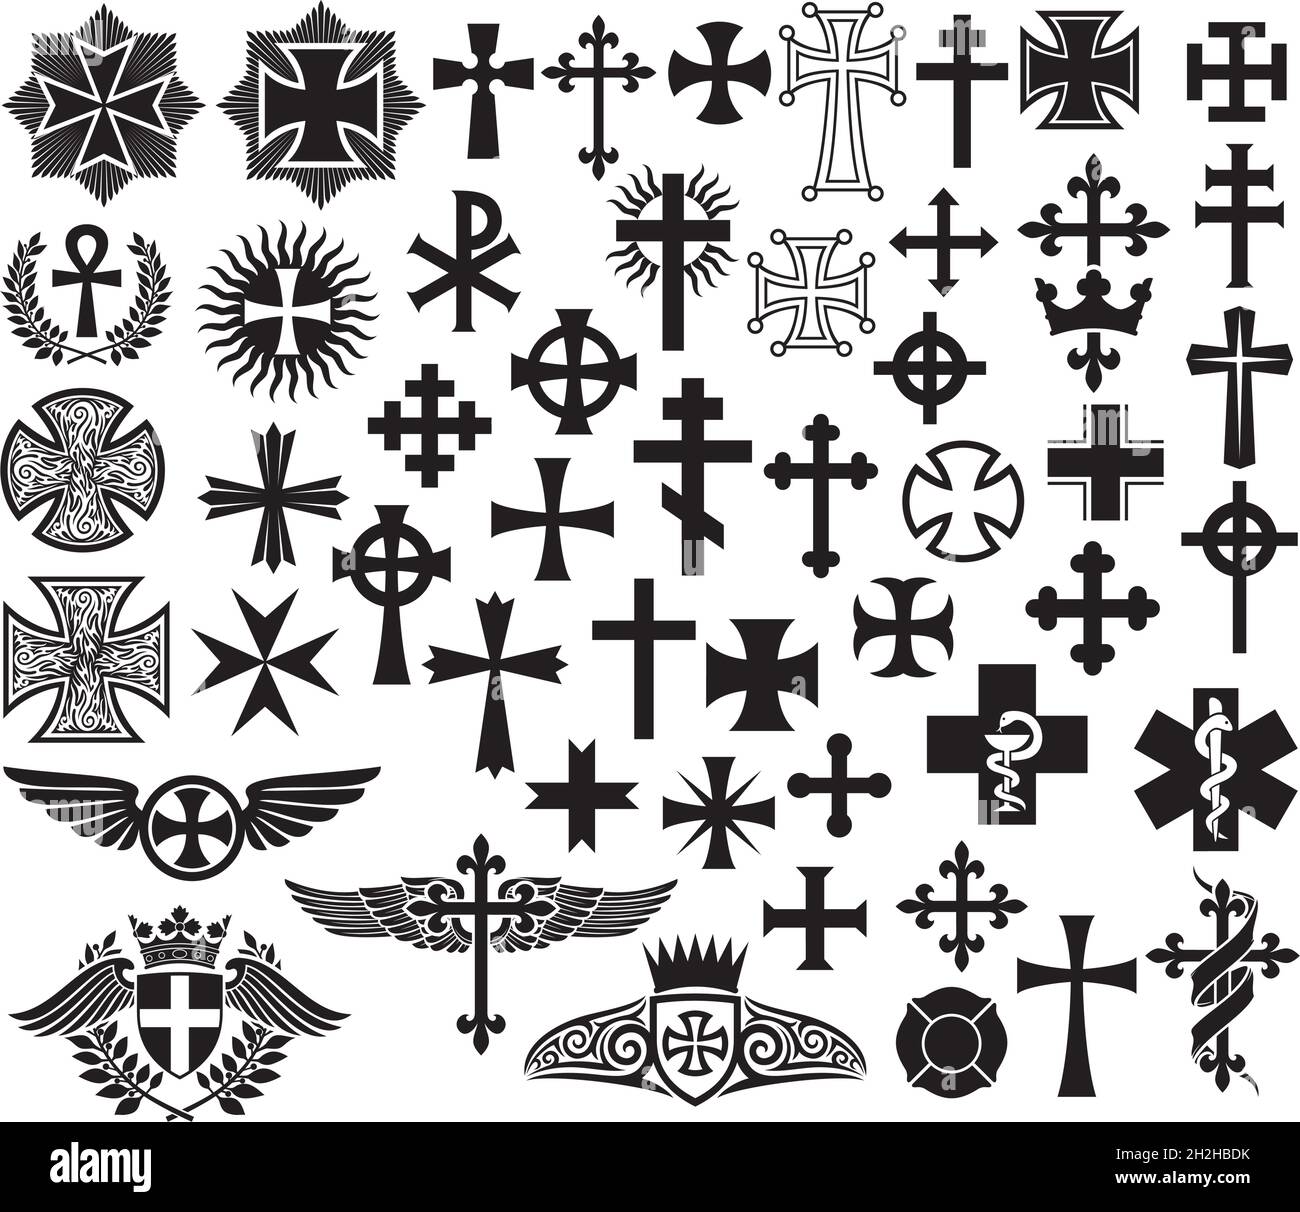 Big collection of various types of crosses vector illustration Stock Vector